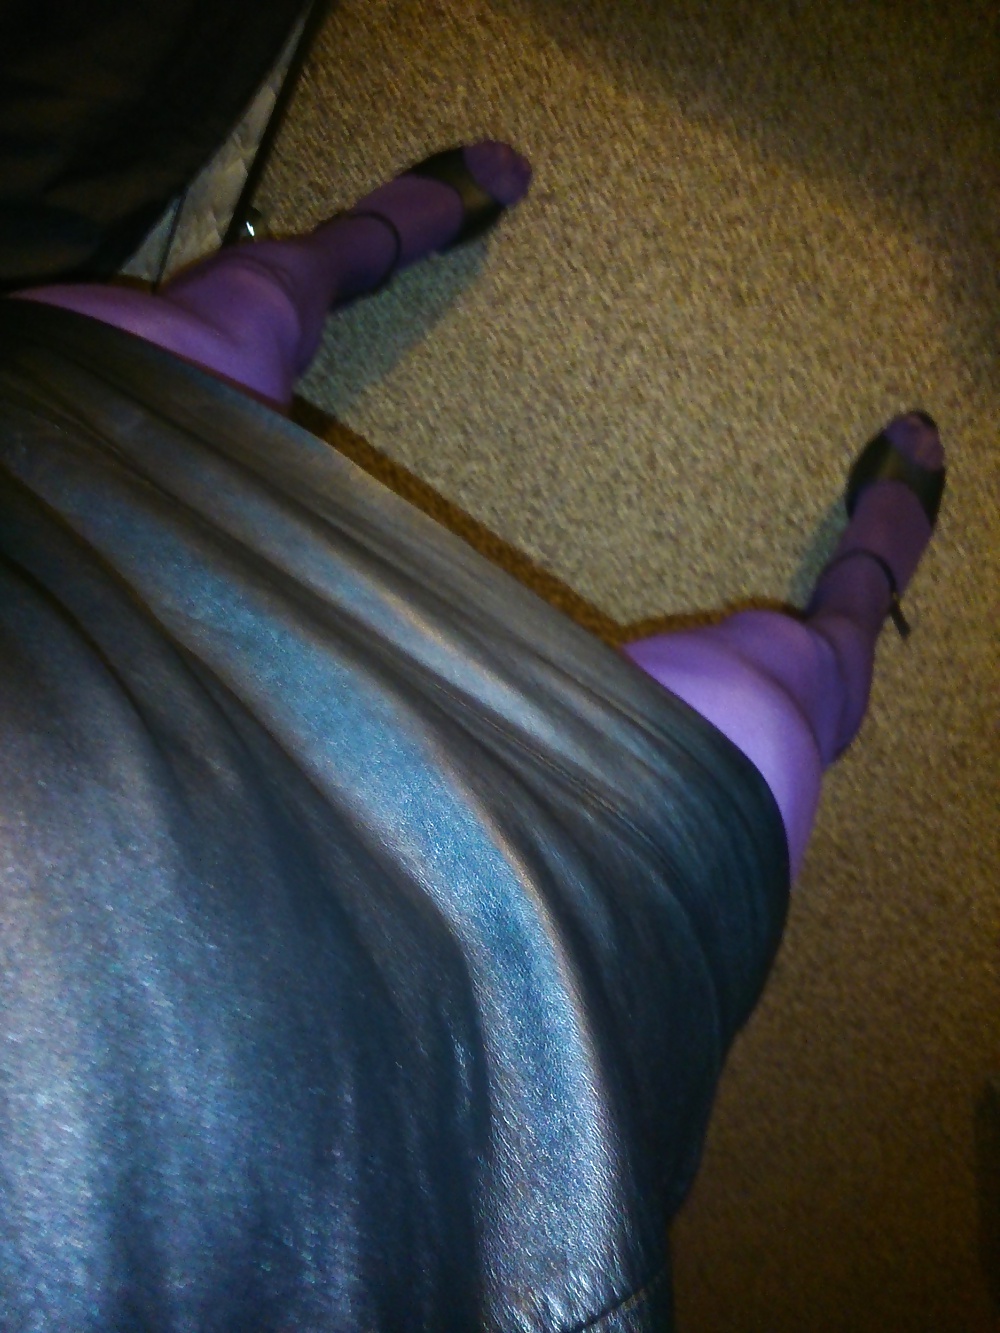 Feet And Legs In Purple Stockings, Leather Dress And Heels #33525514